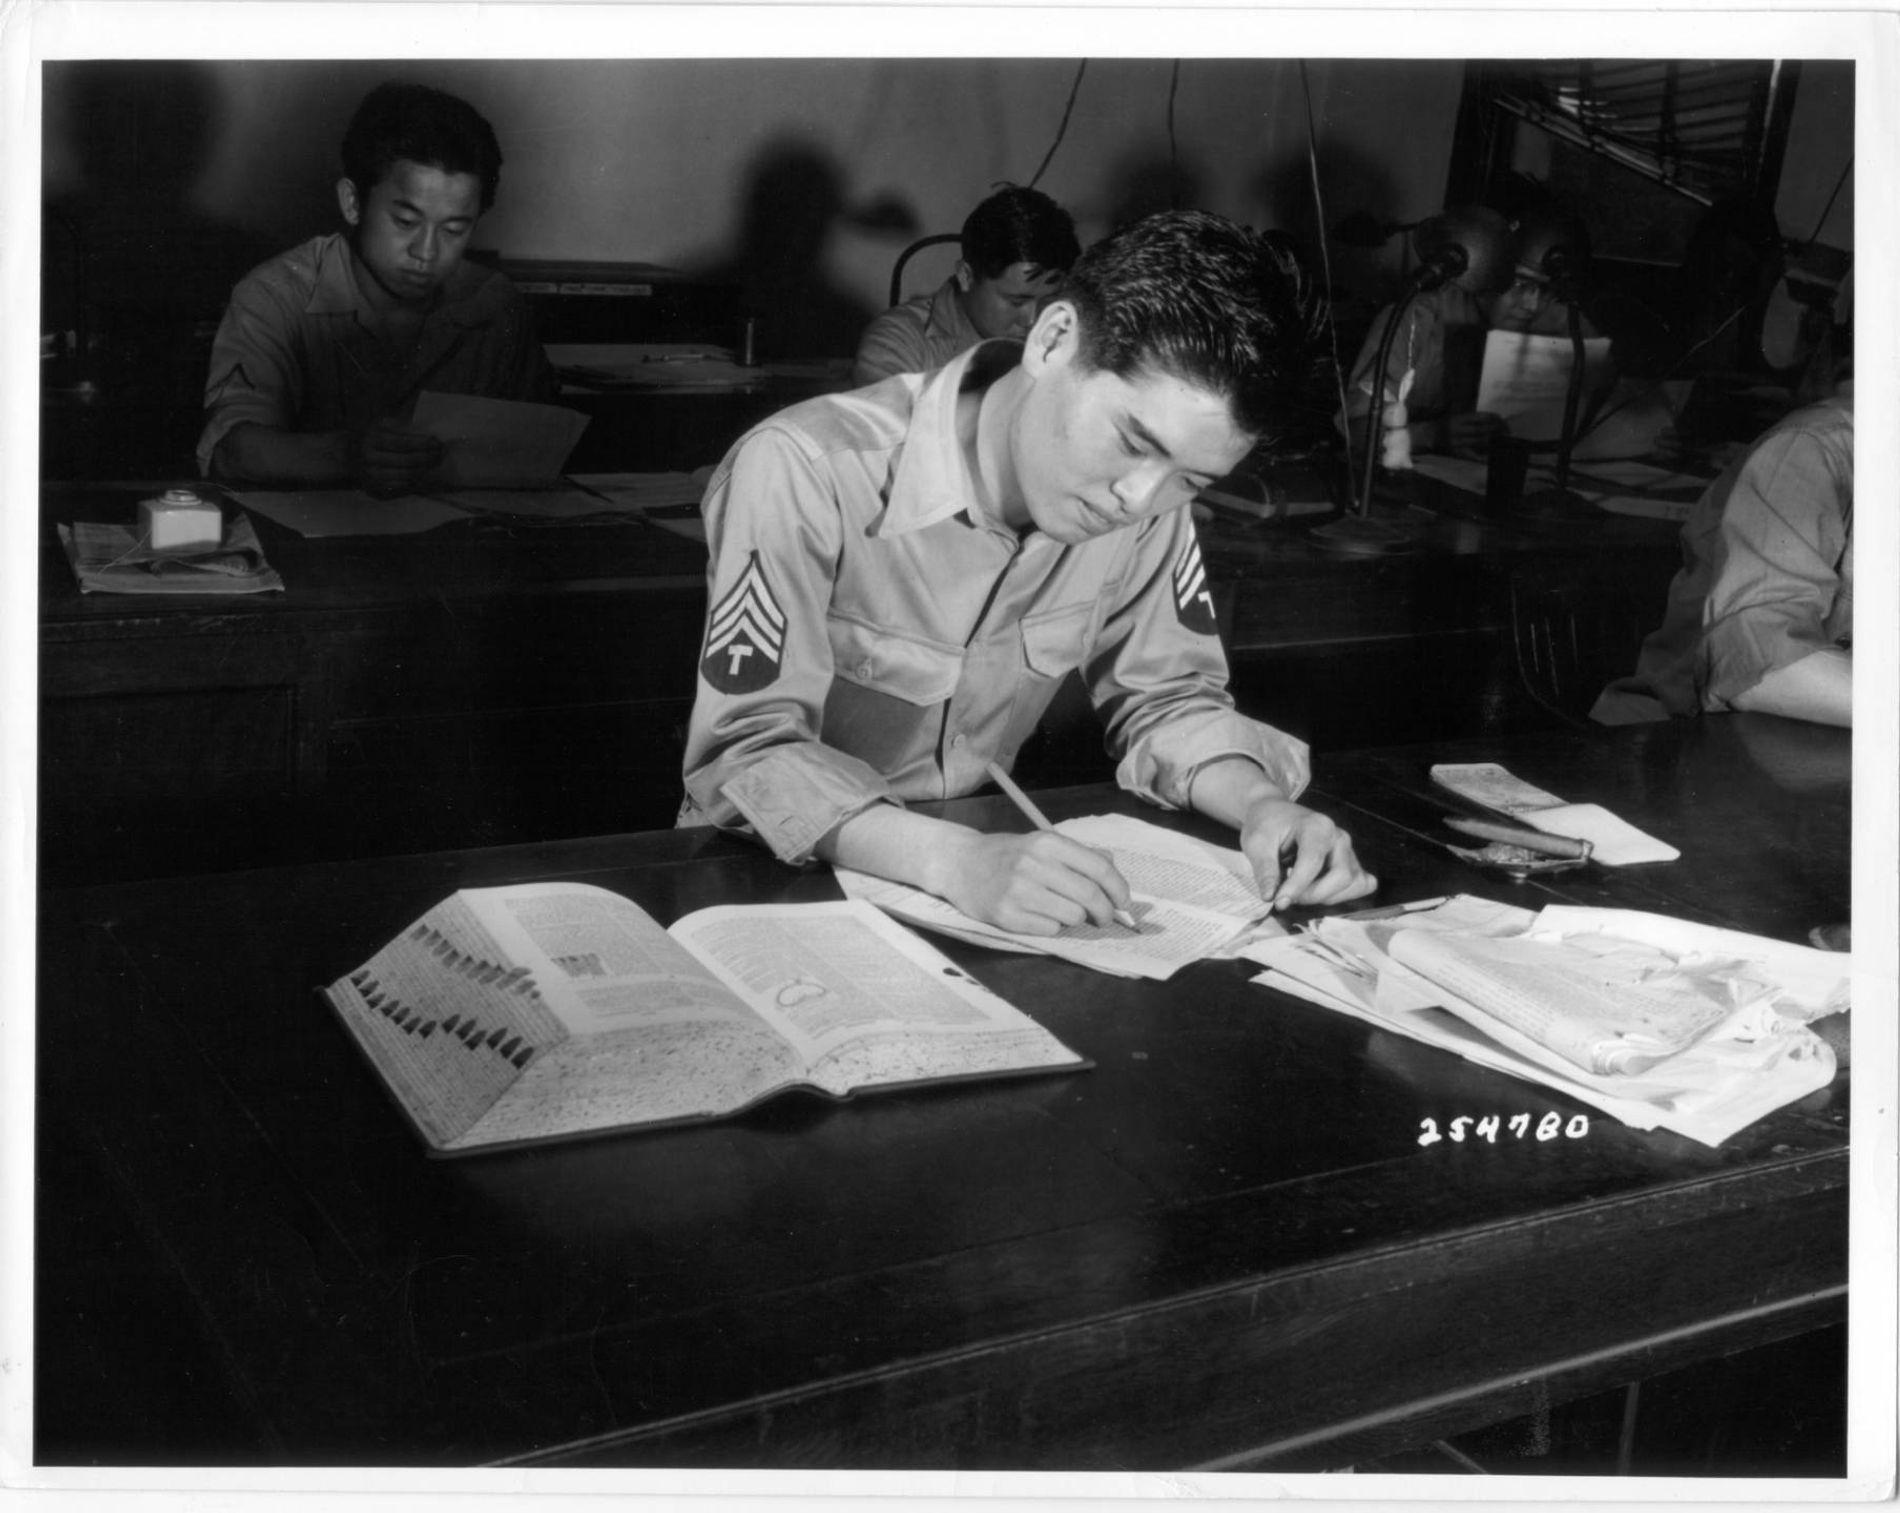 A Japanese-American soldier checks a document in Tokyo, Japan to determine its accuracy. | Credit: Densho